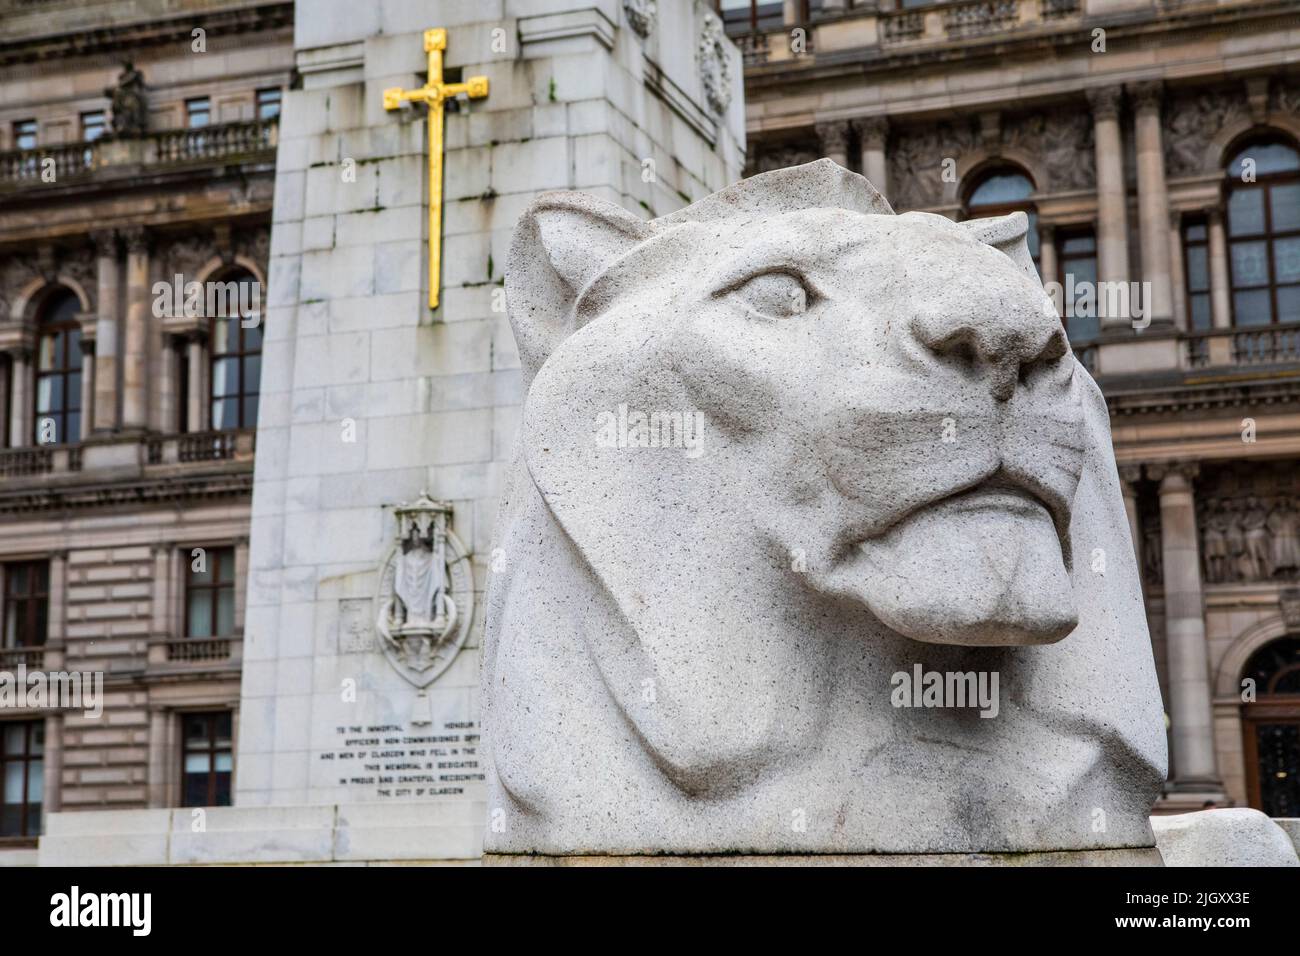 Close-up of one of the famous lion sculptures at the Glasgow Cenotaph - dedicated to those who lost their lives in both world wars, in the city of Gla Stock Photo